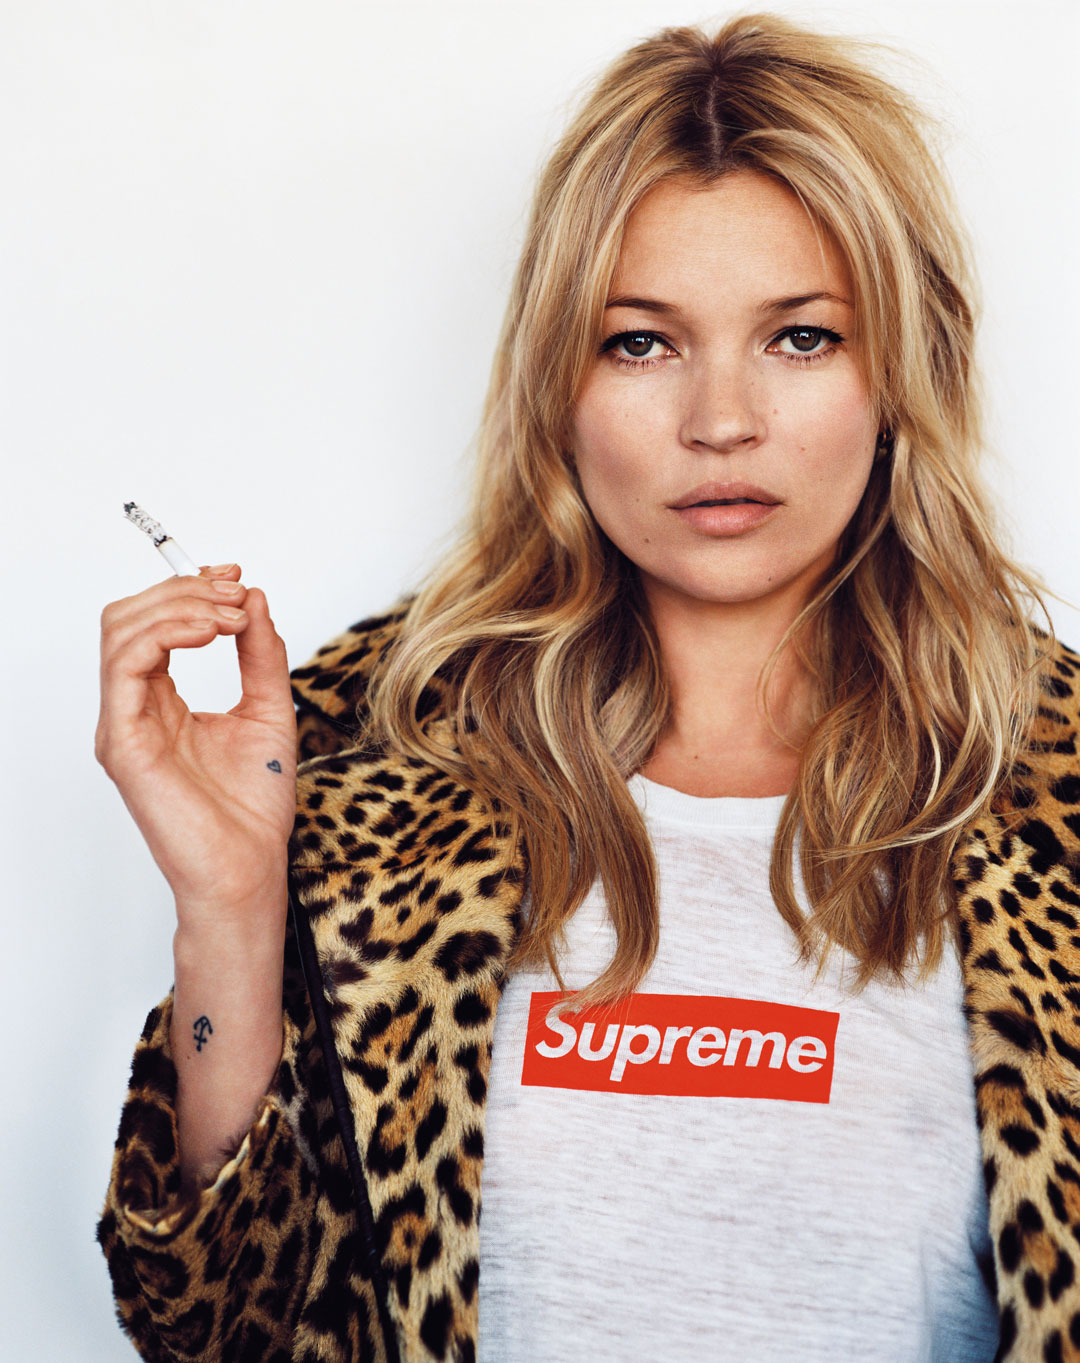 Kate Moss by Alasdair McLellan, London, 2012, as reproduced in our new Supreme book